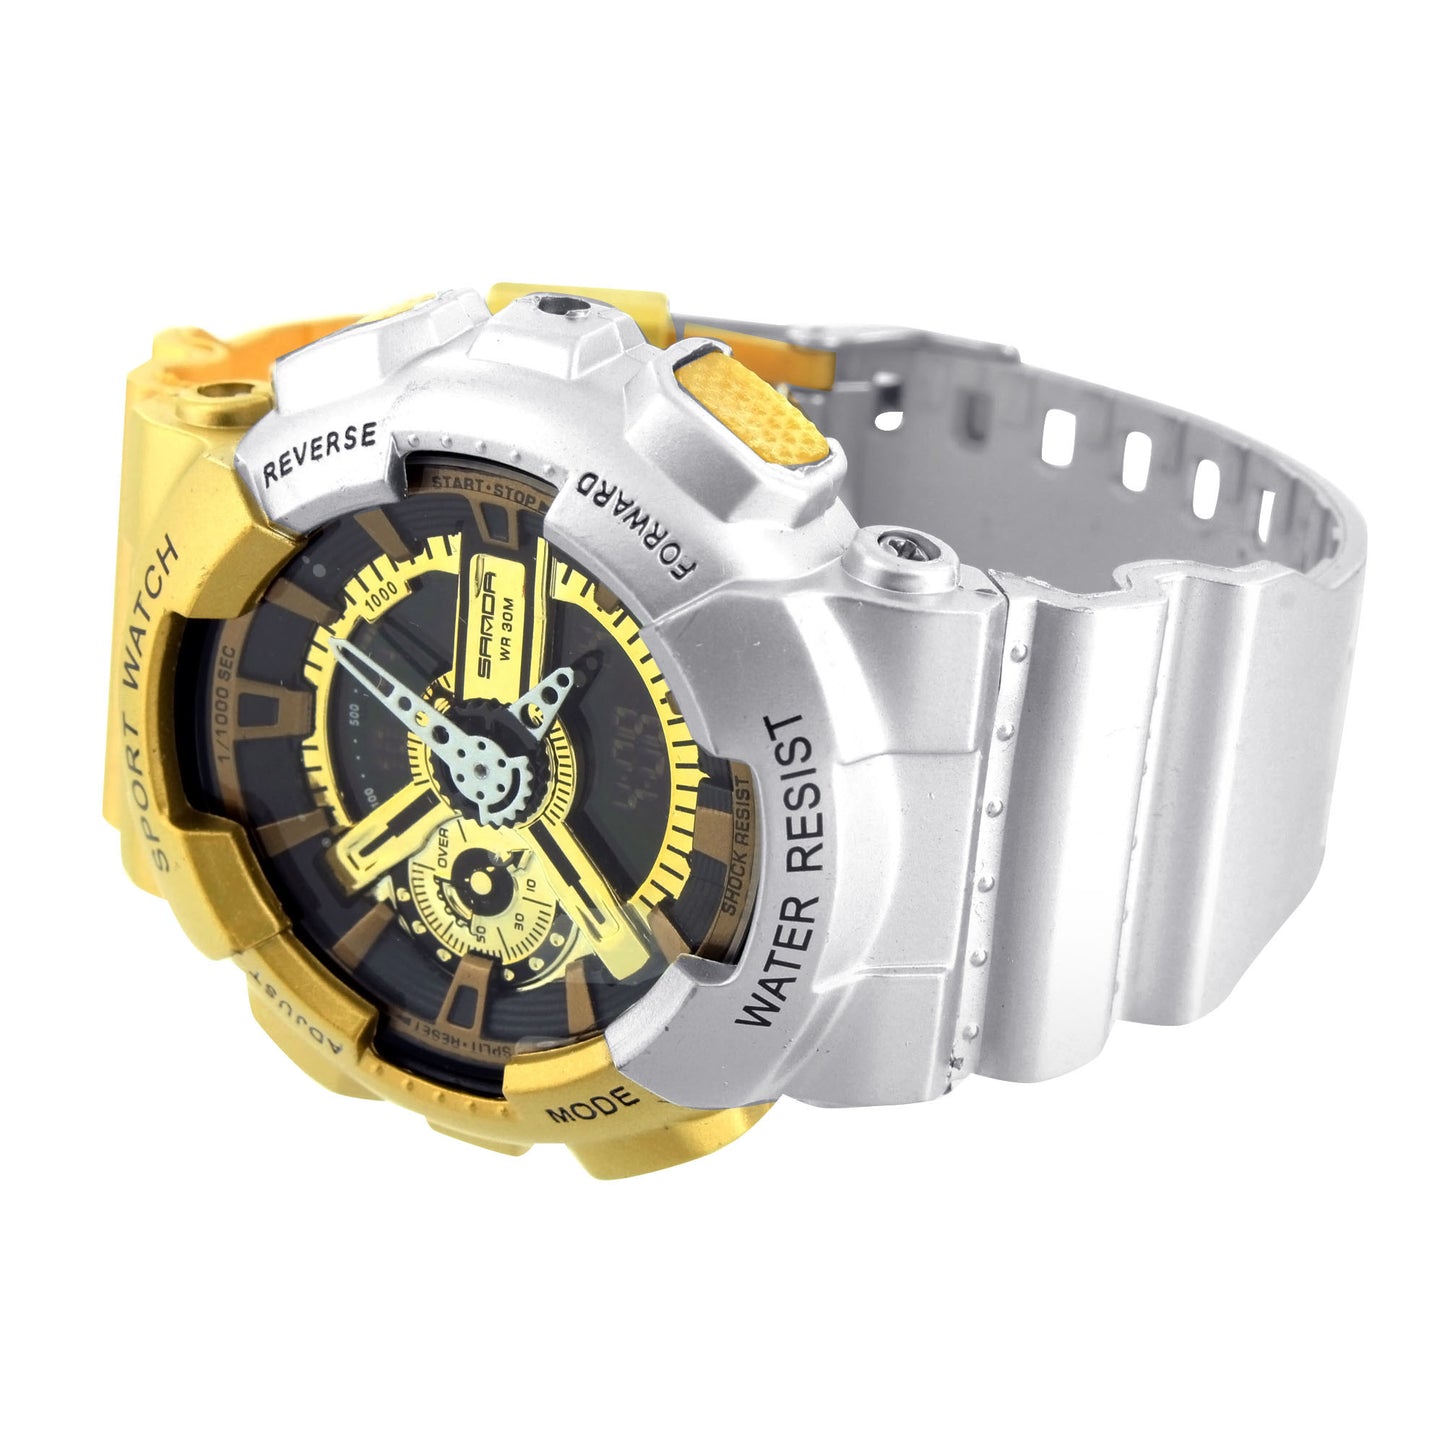 Watch Gold Silver Sports Editions Digital Analog Brand New